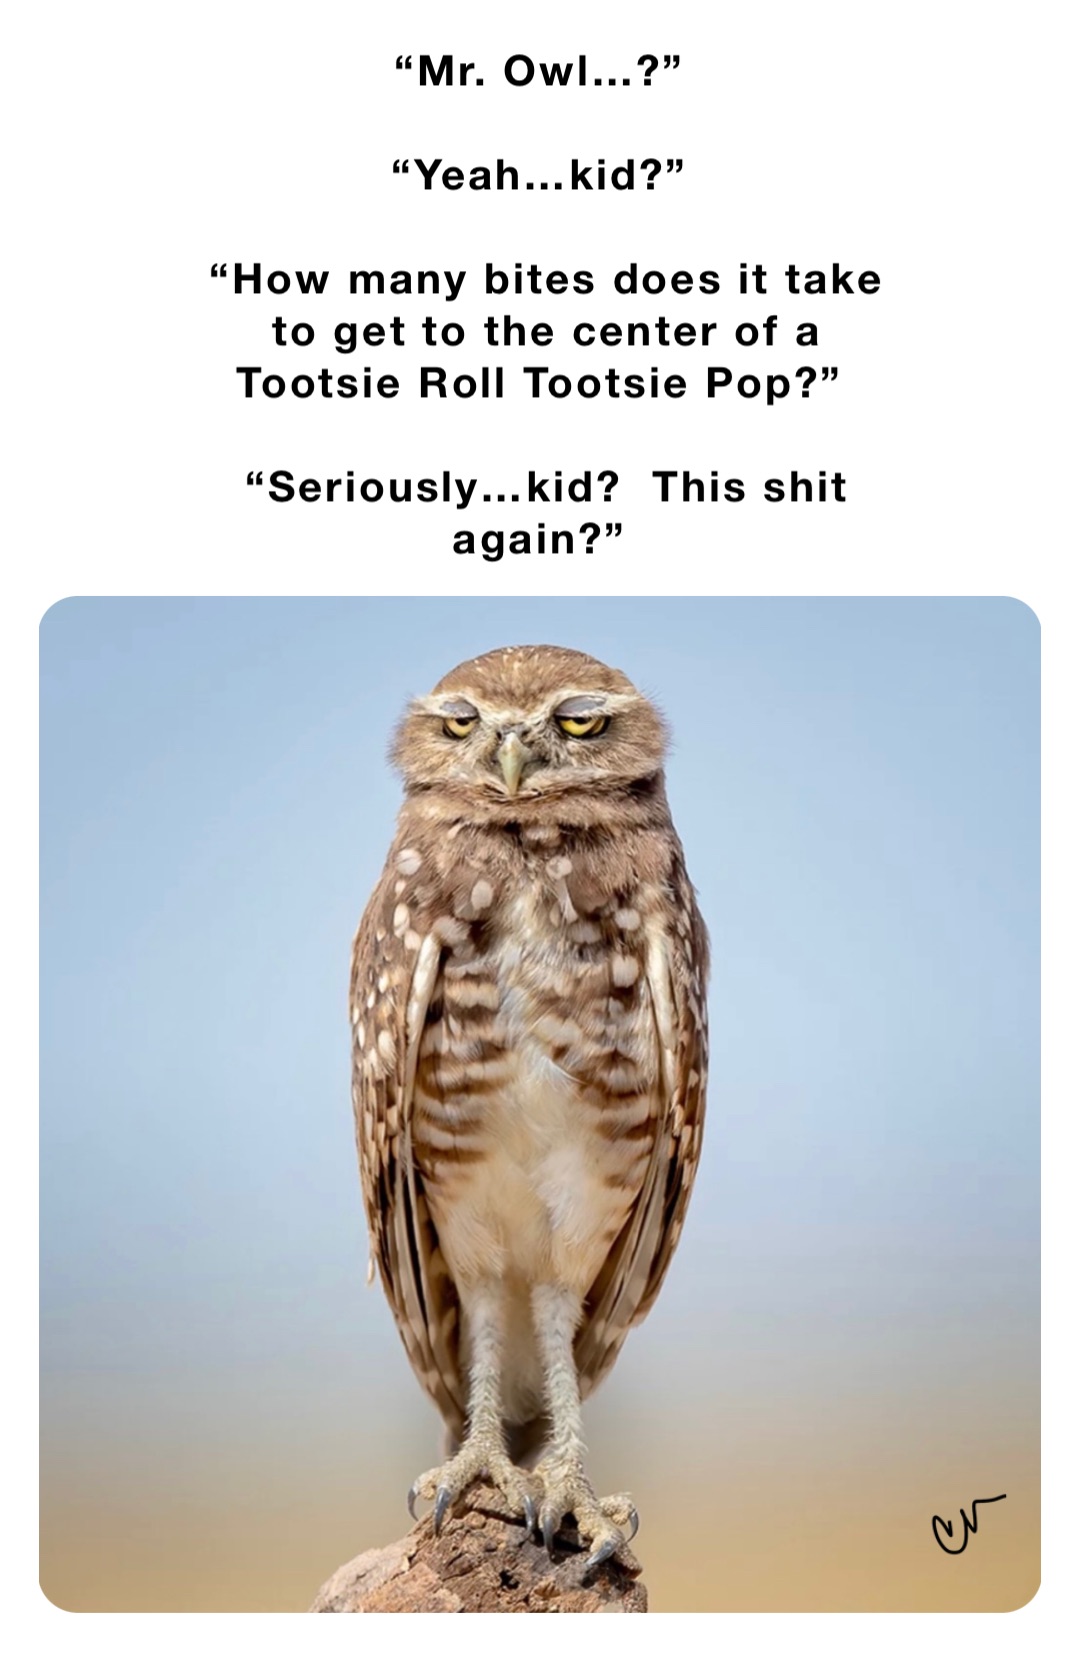 “Mr. Owl…?”

“Yeah…kid?”

“How many bites does it take to get to the center of a Tootsie Roll Tootsie Pop?”

“Seriously…kid?  This shit again?”